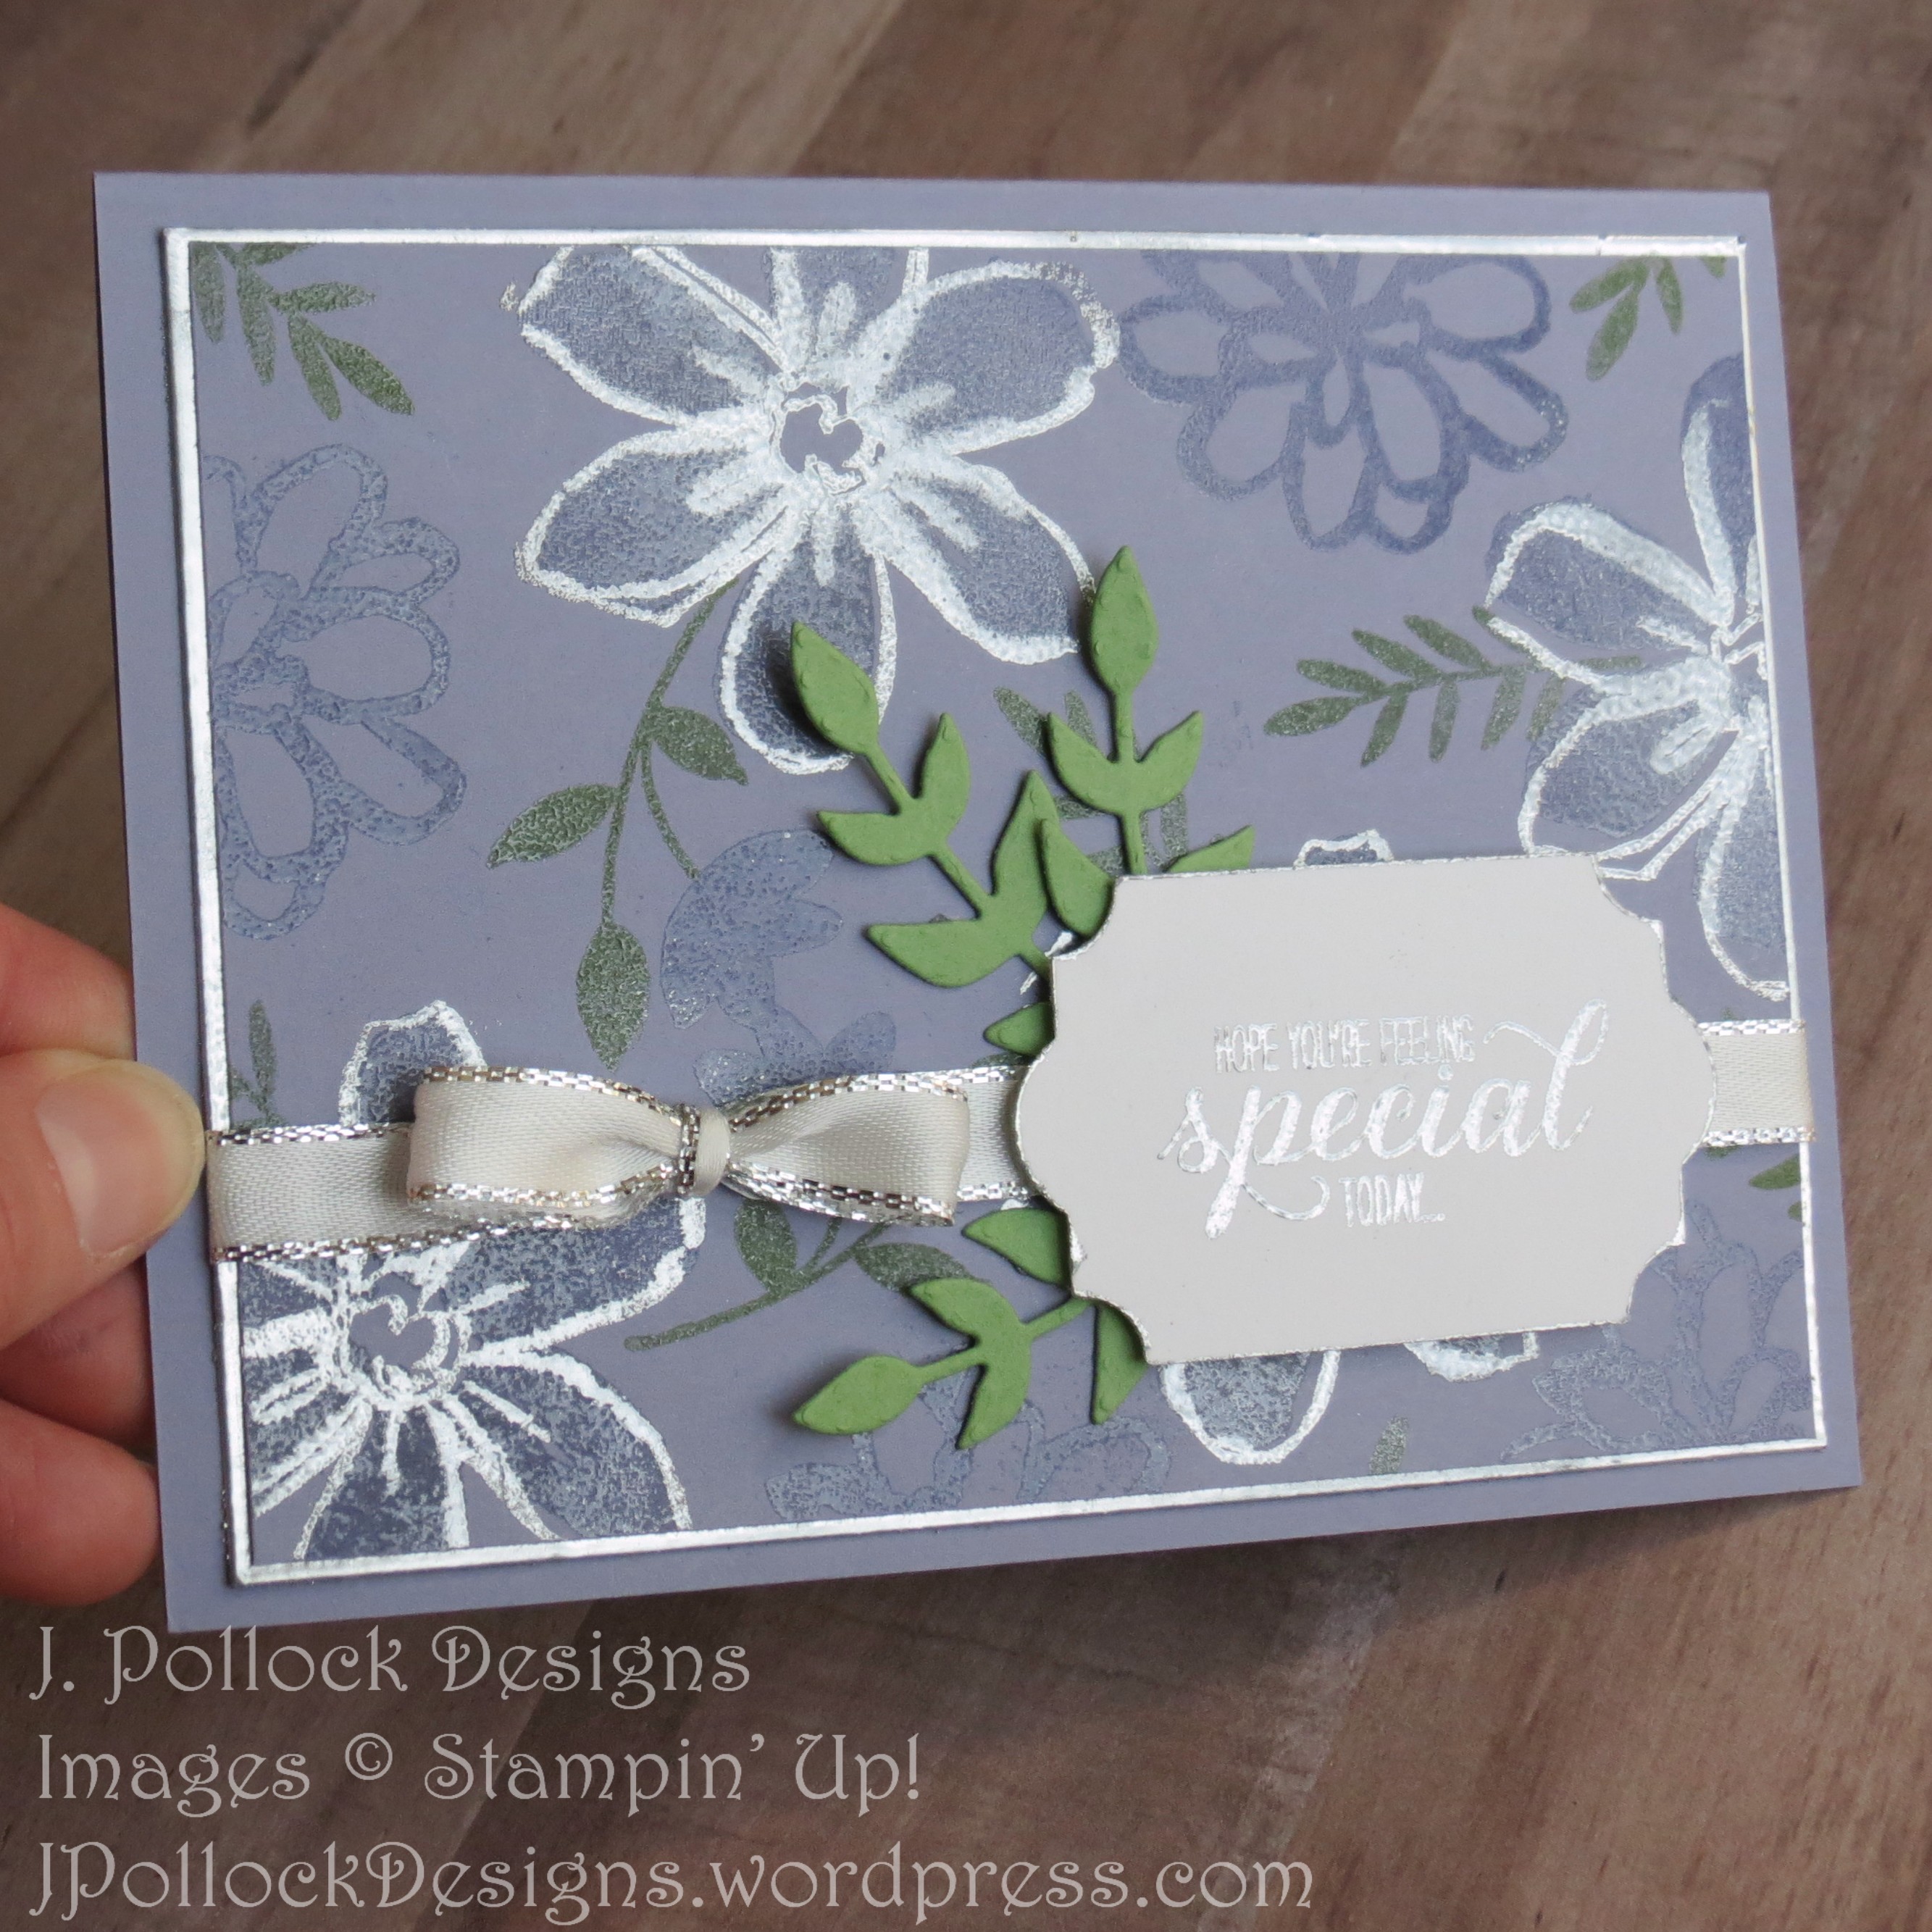 J. Pollock Designs - Stampin' Up! - Garden in Bloom, Watercolor Words, Banners for You